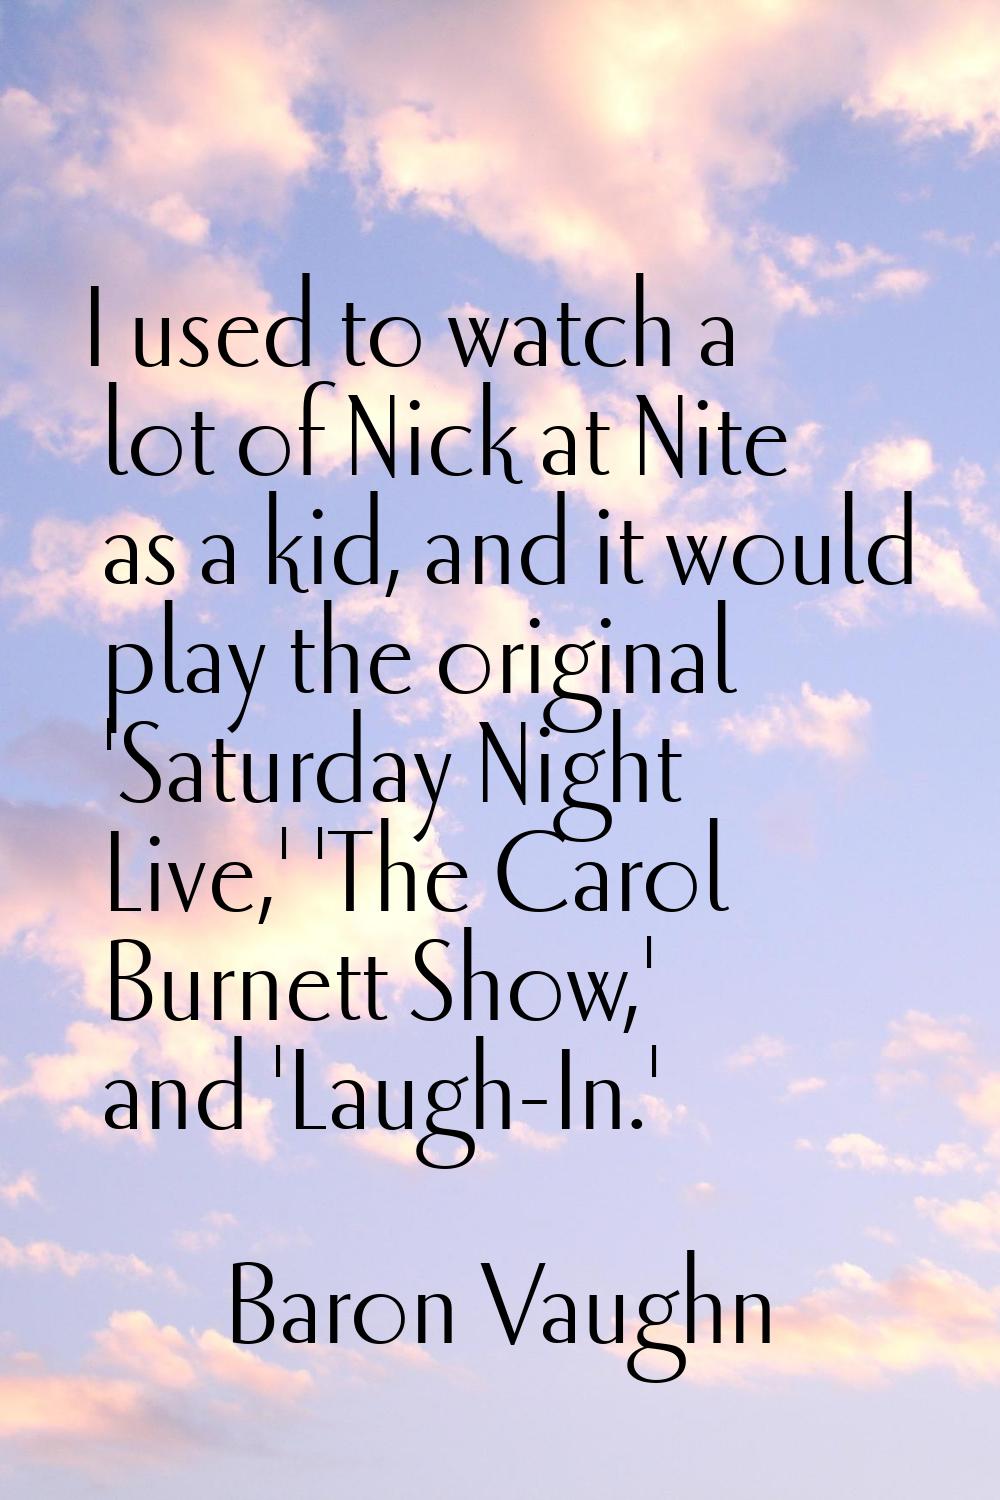 I used to watch a lot of Nick at Nite as a kid, and it would play the original 'Saturday Night Live